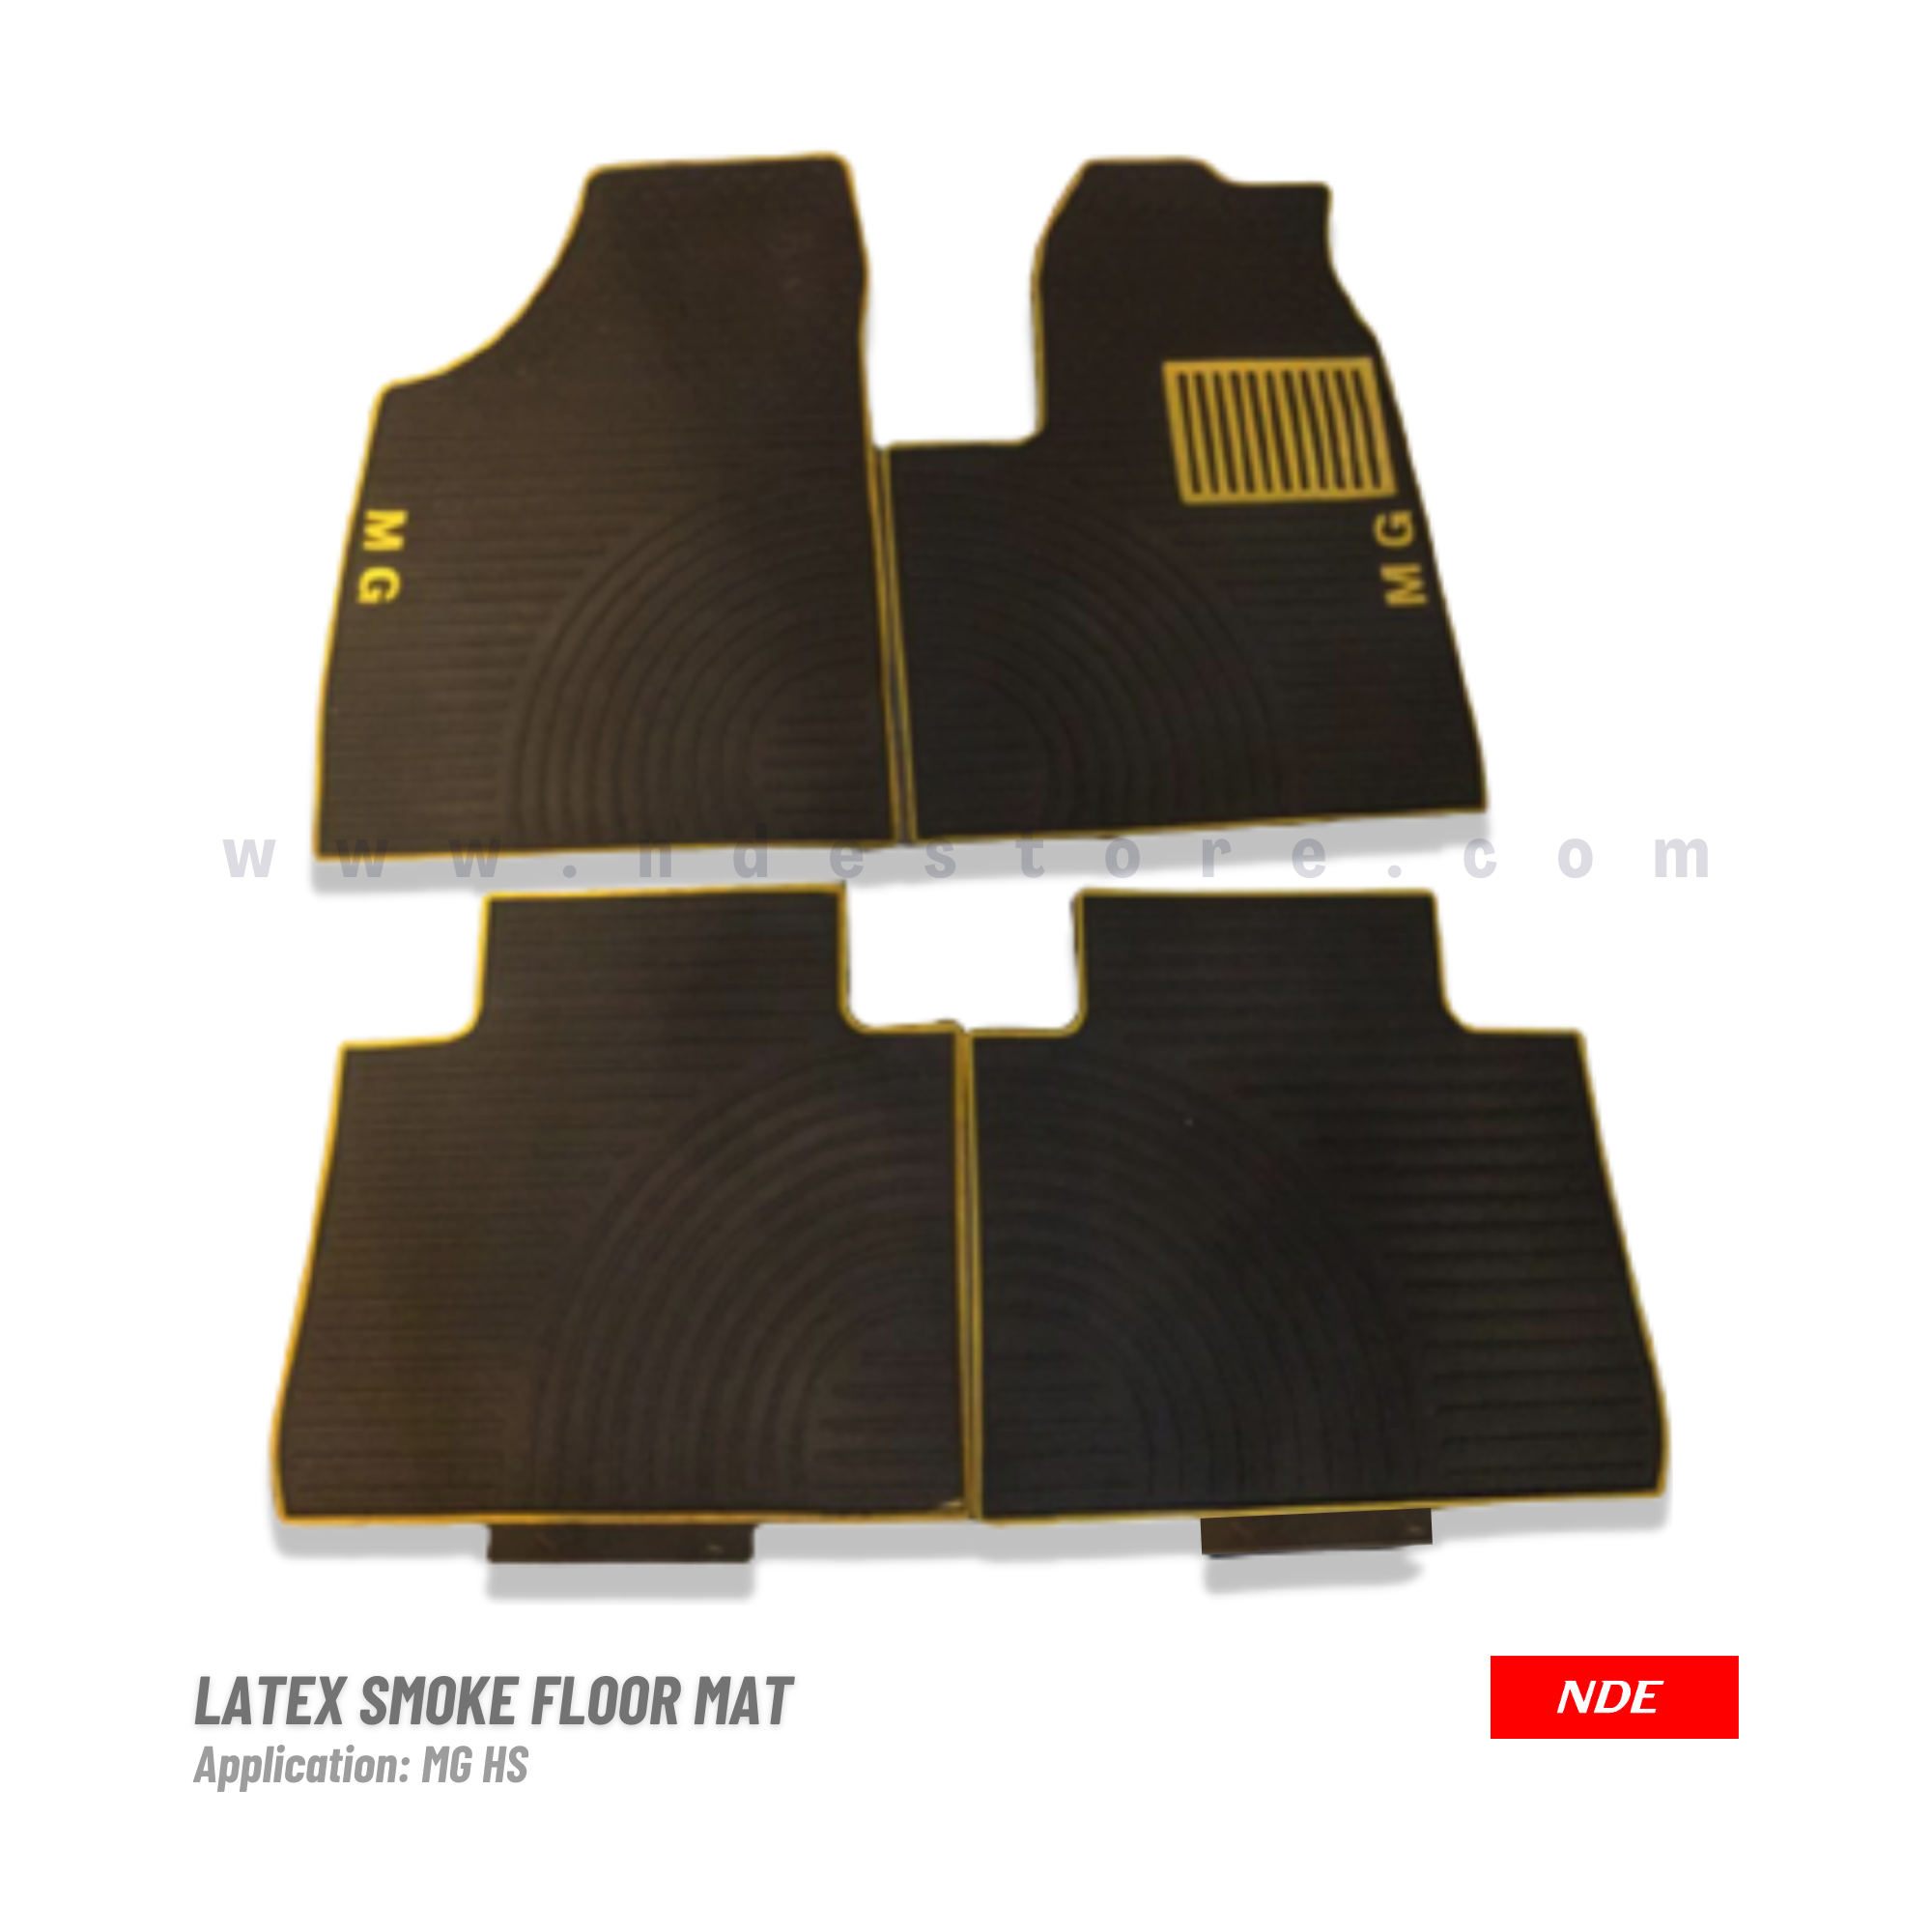 FLOOR MAT RUBBER / LATEX SMOKE TYPE FOR MG HS